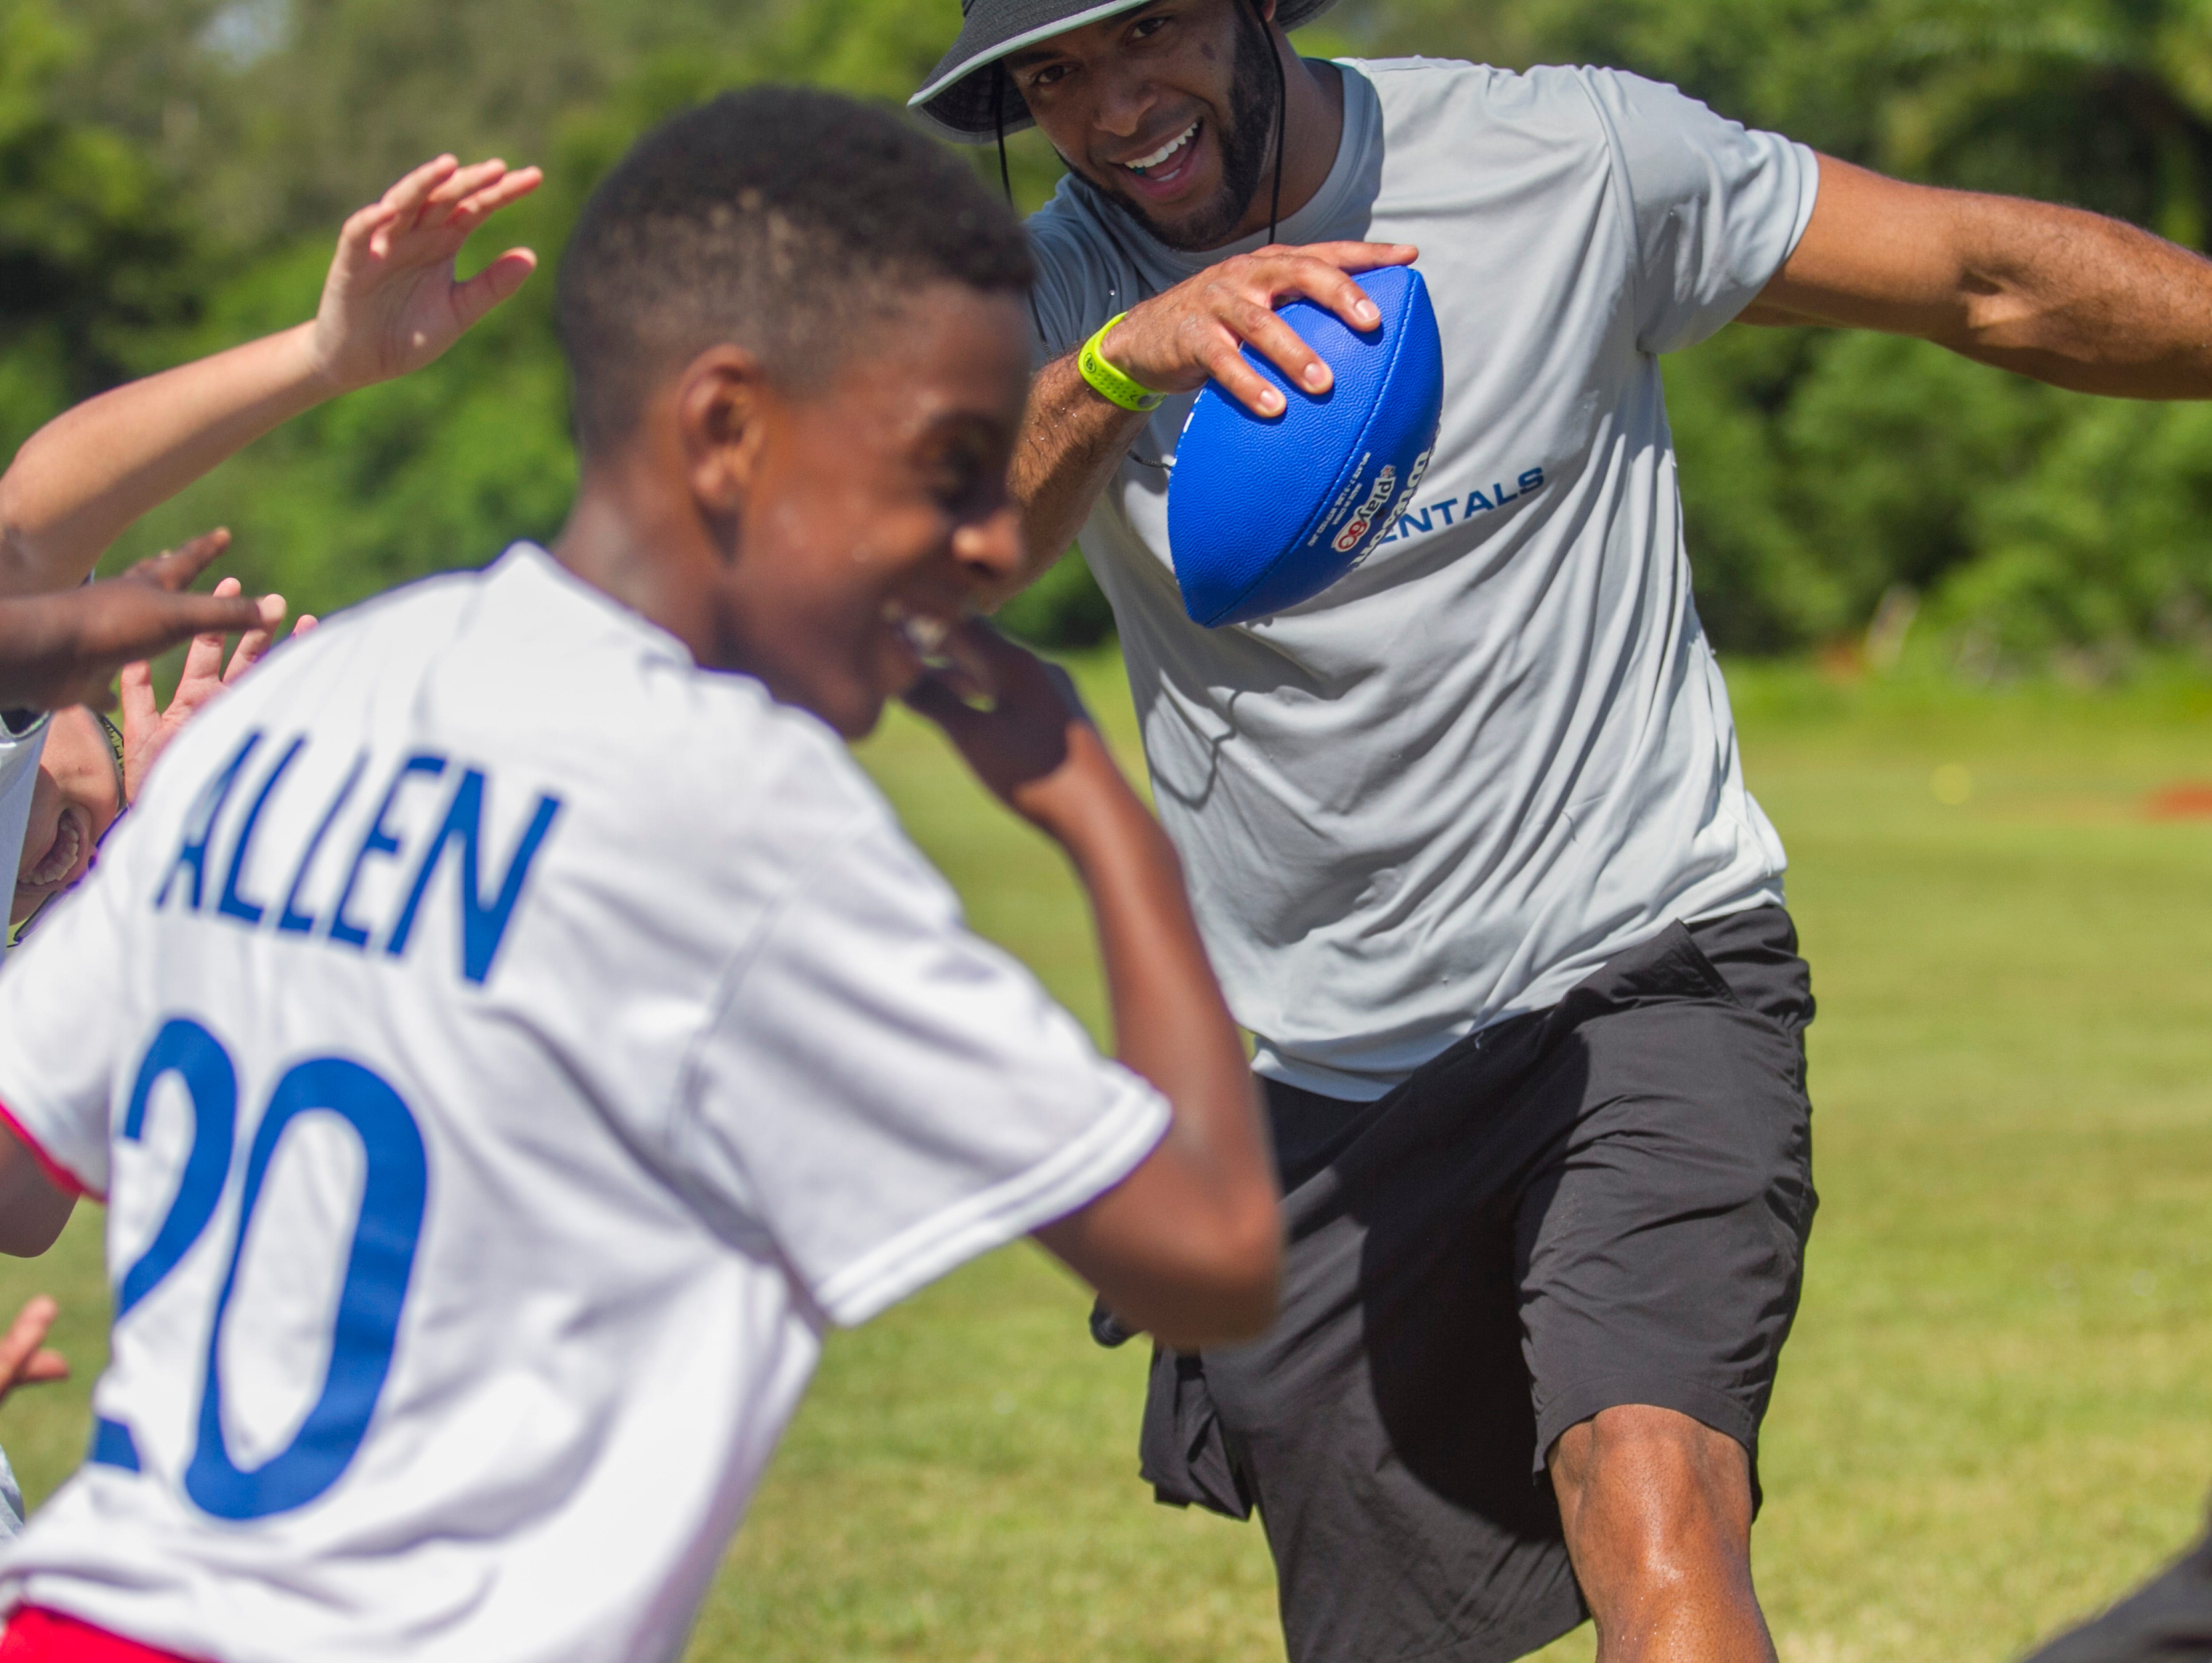 Nate Allen dabs with a group during his free youth football camp at McGregor Baptist Church on Saturday in Fort Myers.